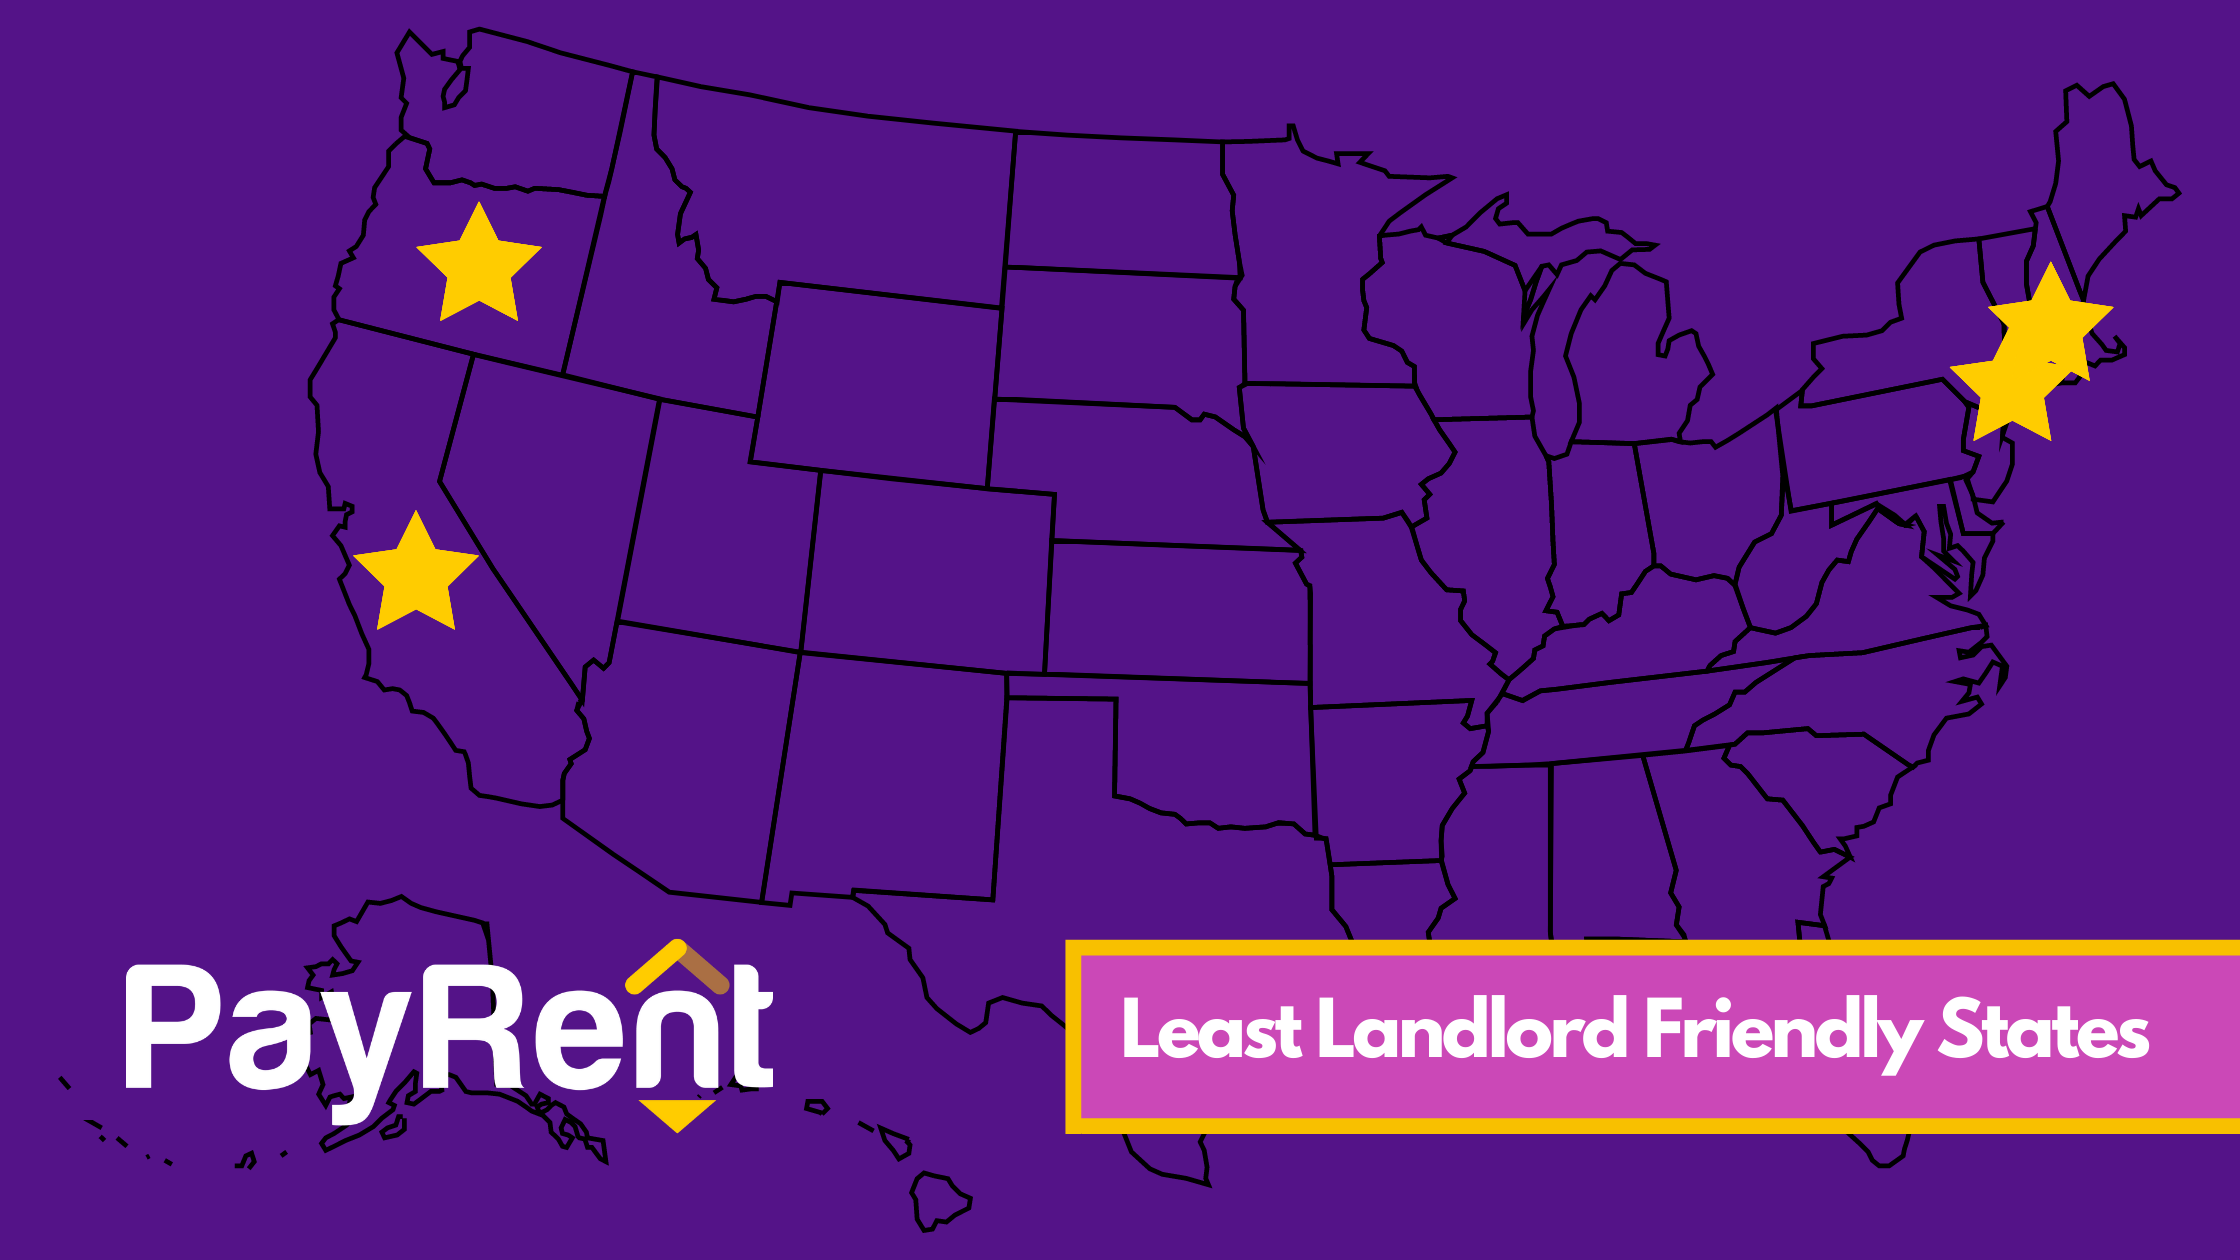 The Least Landlord-Friendly States